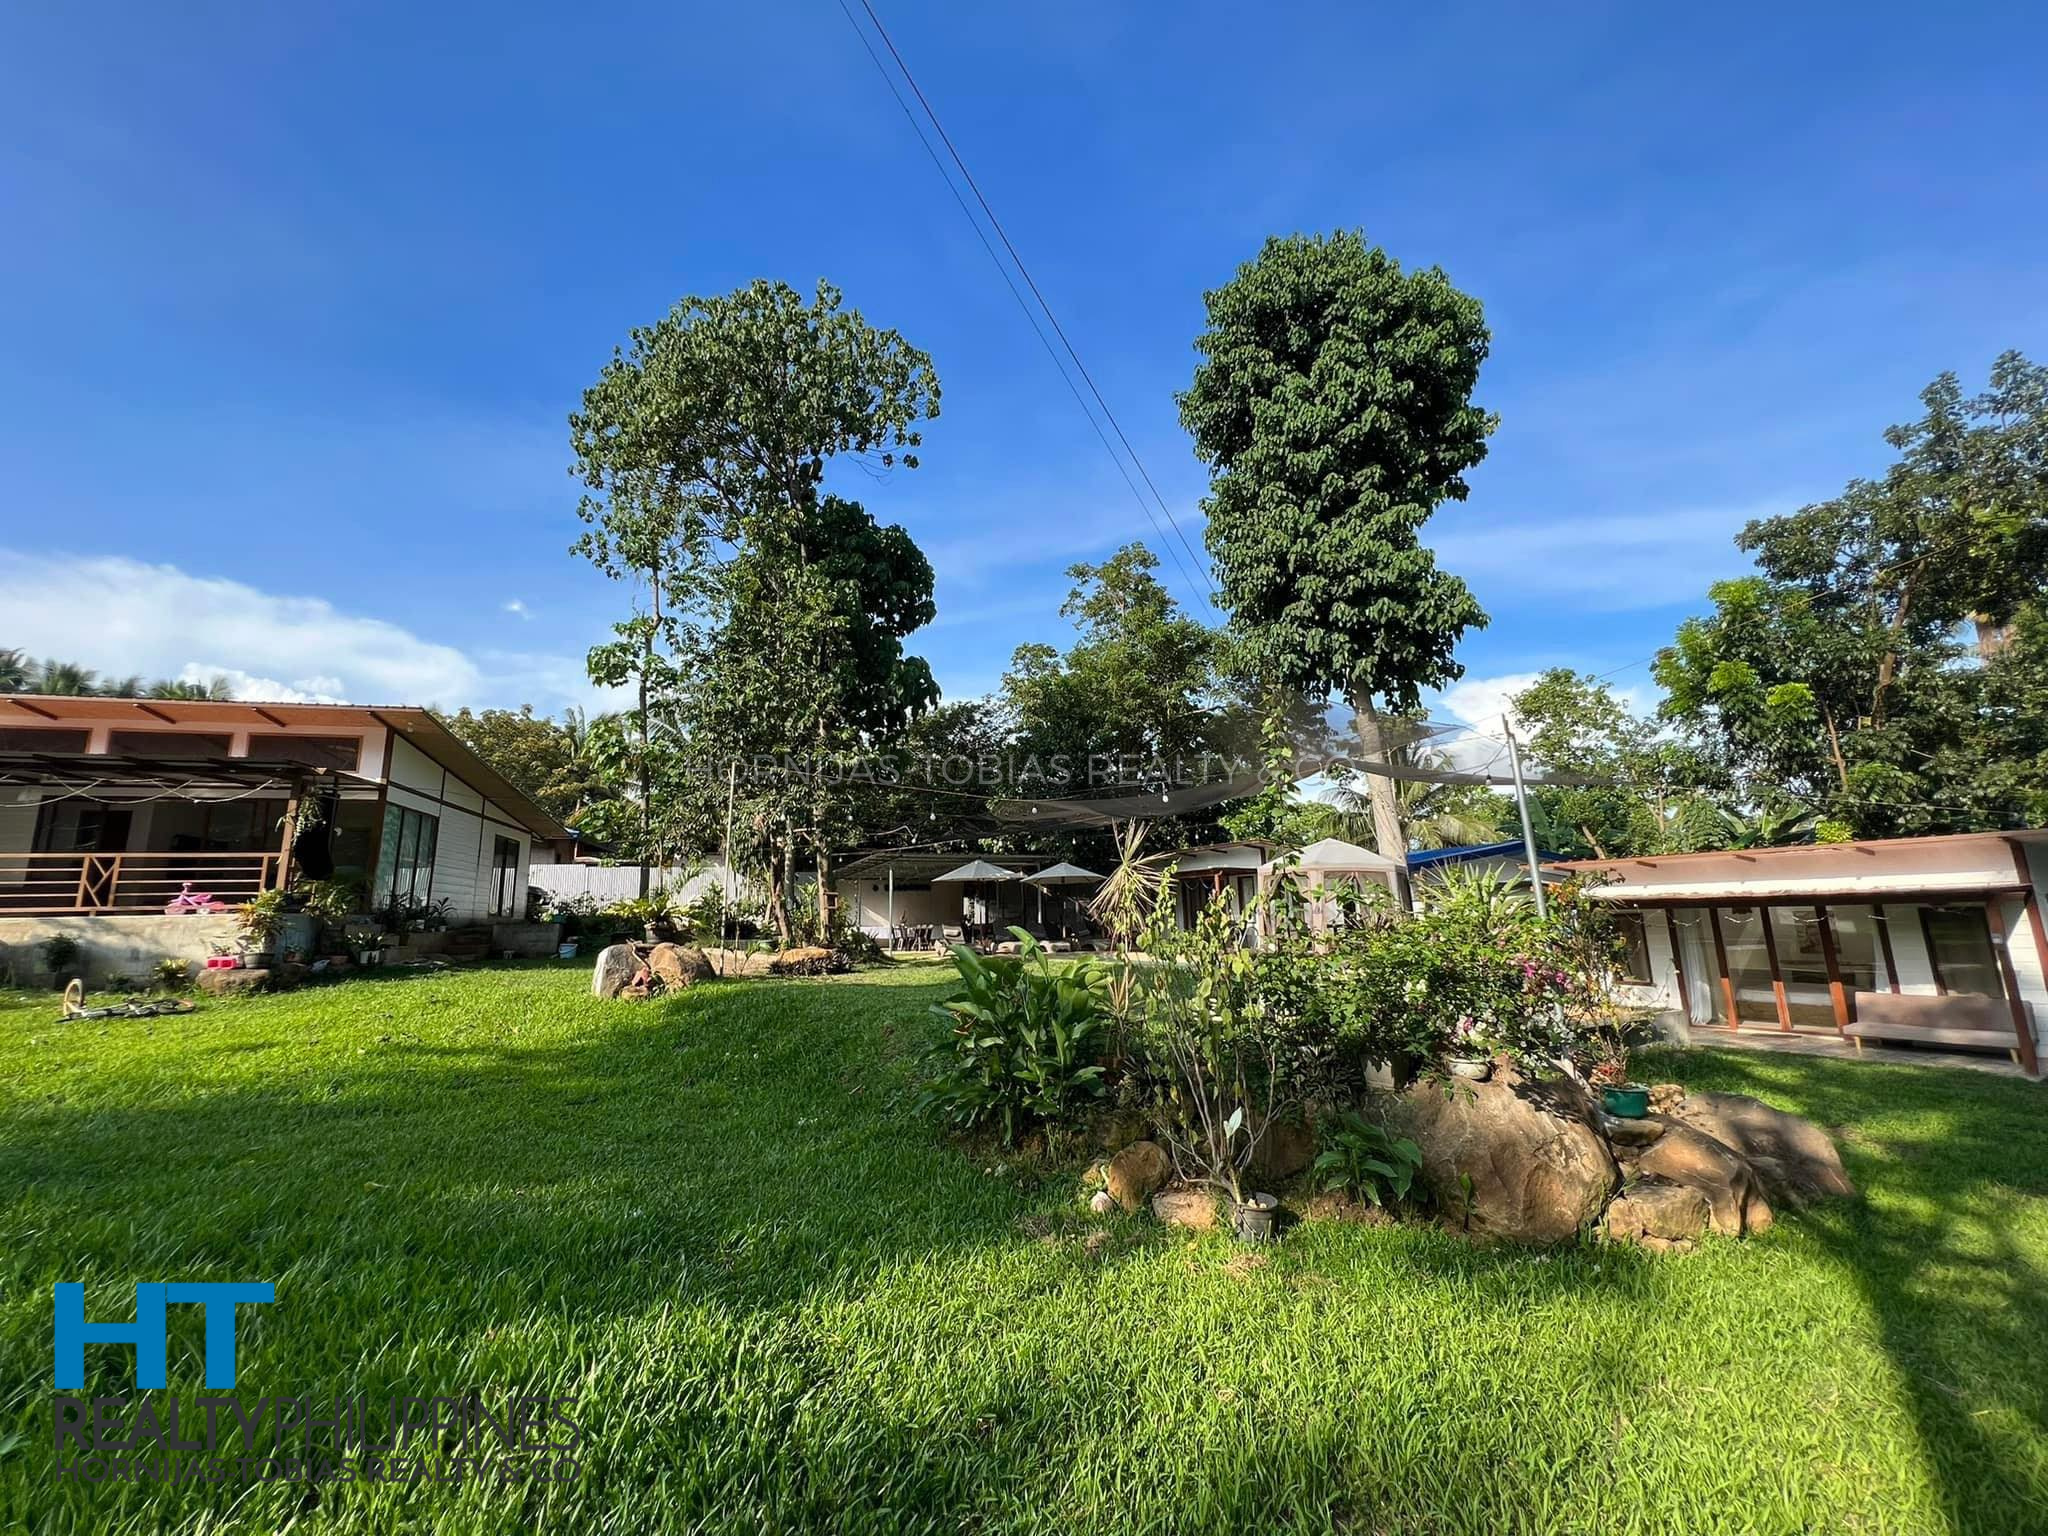 Lot - For Sale - Inland Resort and Rest House in Binugao, Toril, Davao City